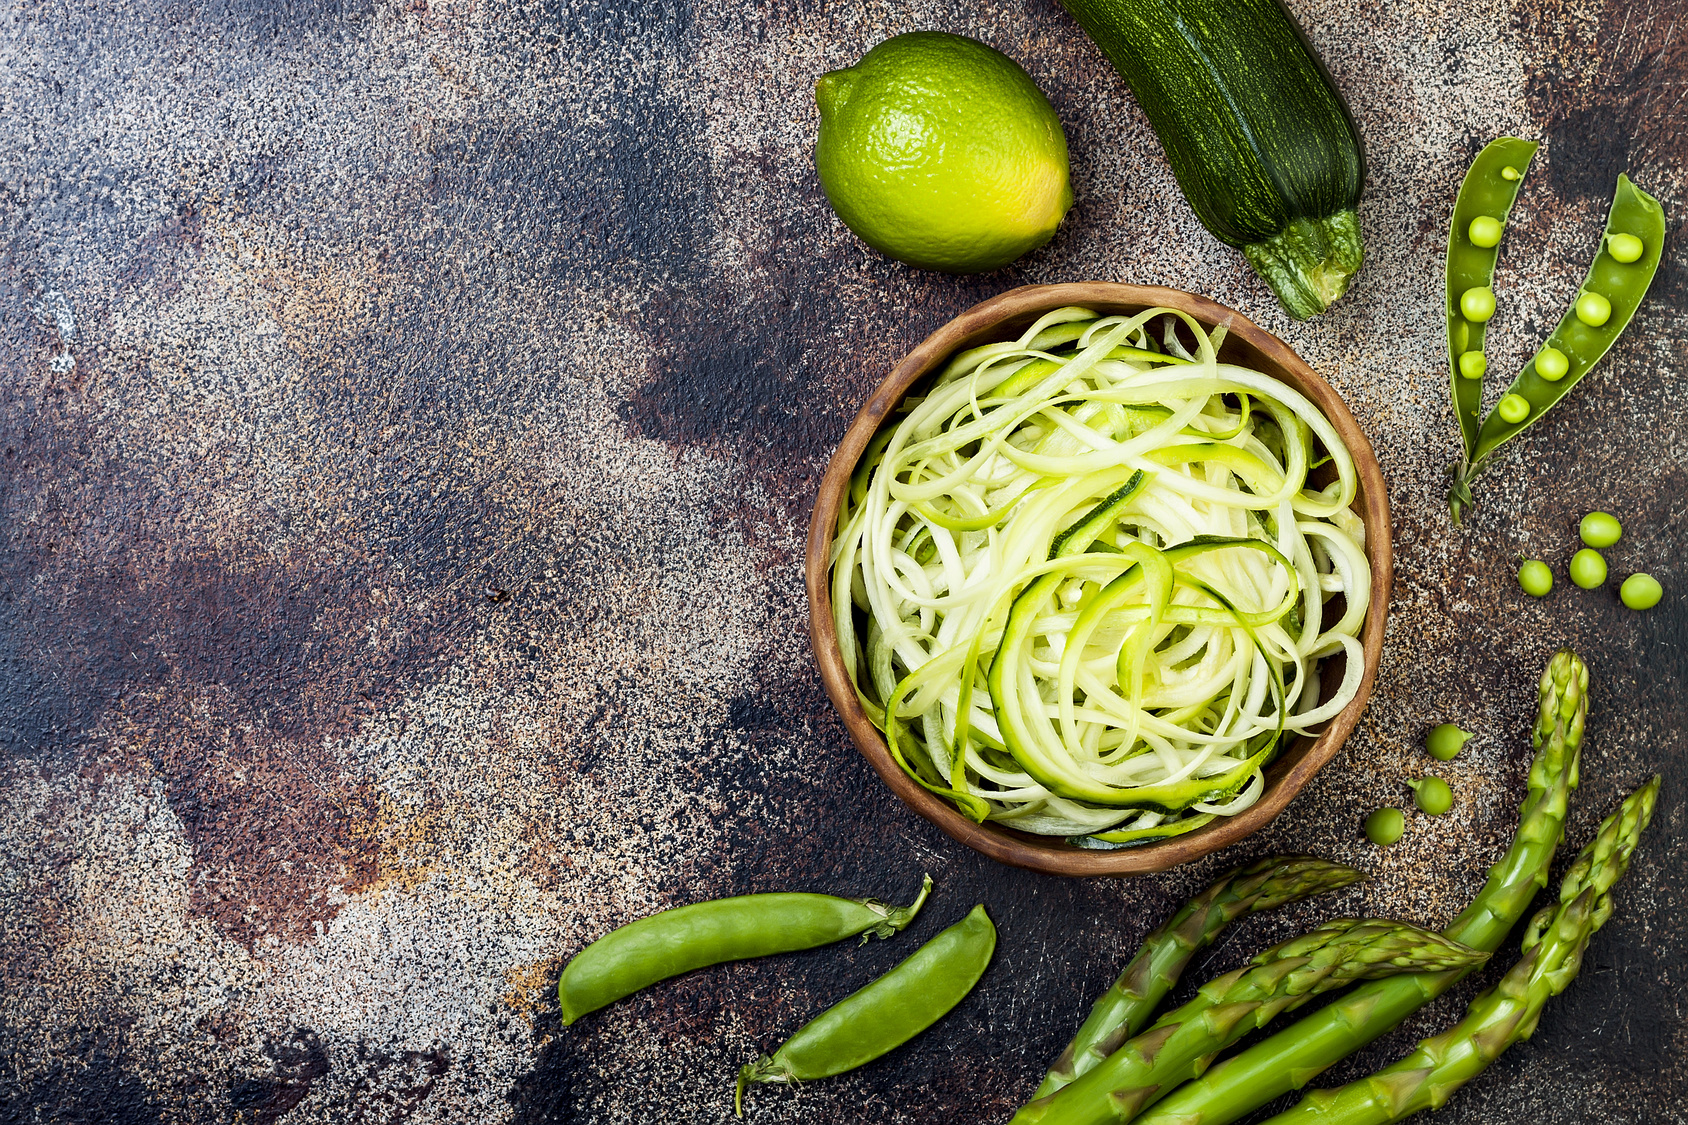 Zucchini spaghetti or noodles (zoodles) bowl with green veggies. Top view, overhead, copy space